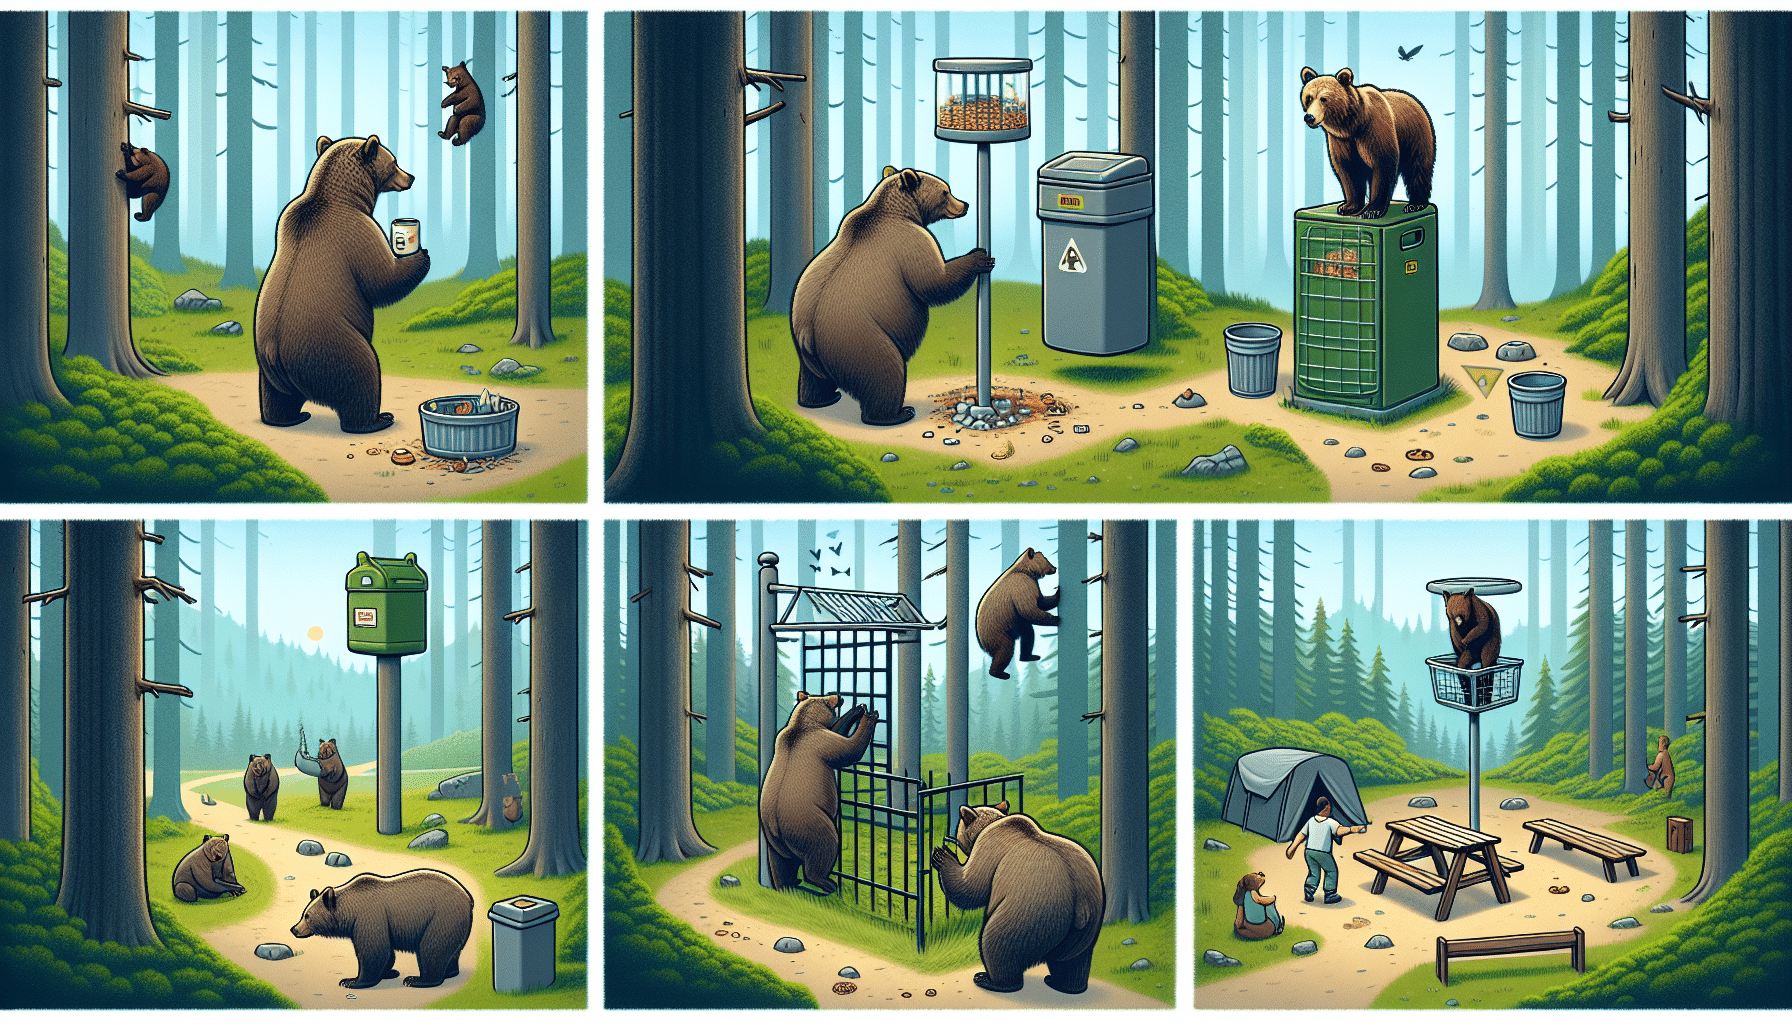 A serene forest landscape in broad daylight, with brown bears engaging in various activities. Some bears are seen curiously inspecting secured garbage cans, while another is inspecting a bear-resistant food storage container. Yet another brown bear is climbing a bear-proof tree platform. There's a bear in the distance who is being distracted by a cleverly placed diversion, far away from a secluded campsite. This scene encapsulates multiple strategies to prevent nuisance behavior by brown bears in a non-harmful manner.